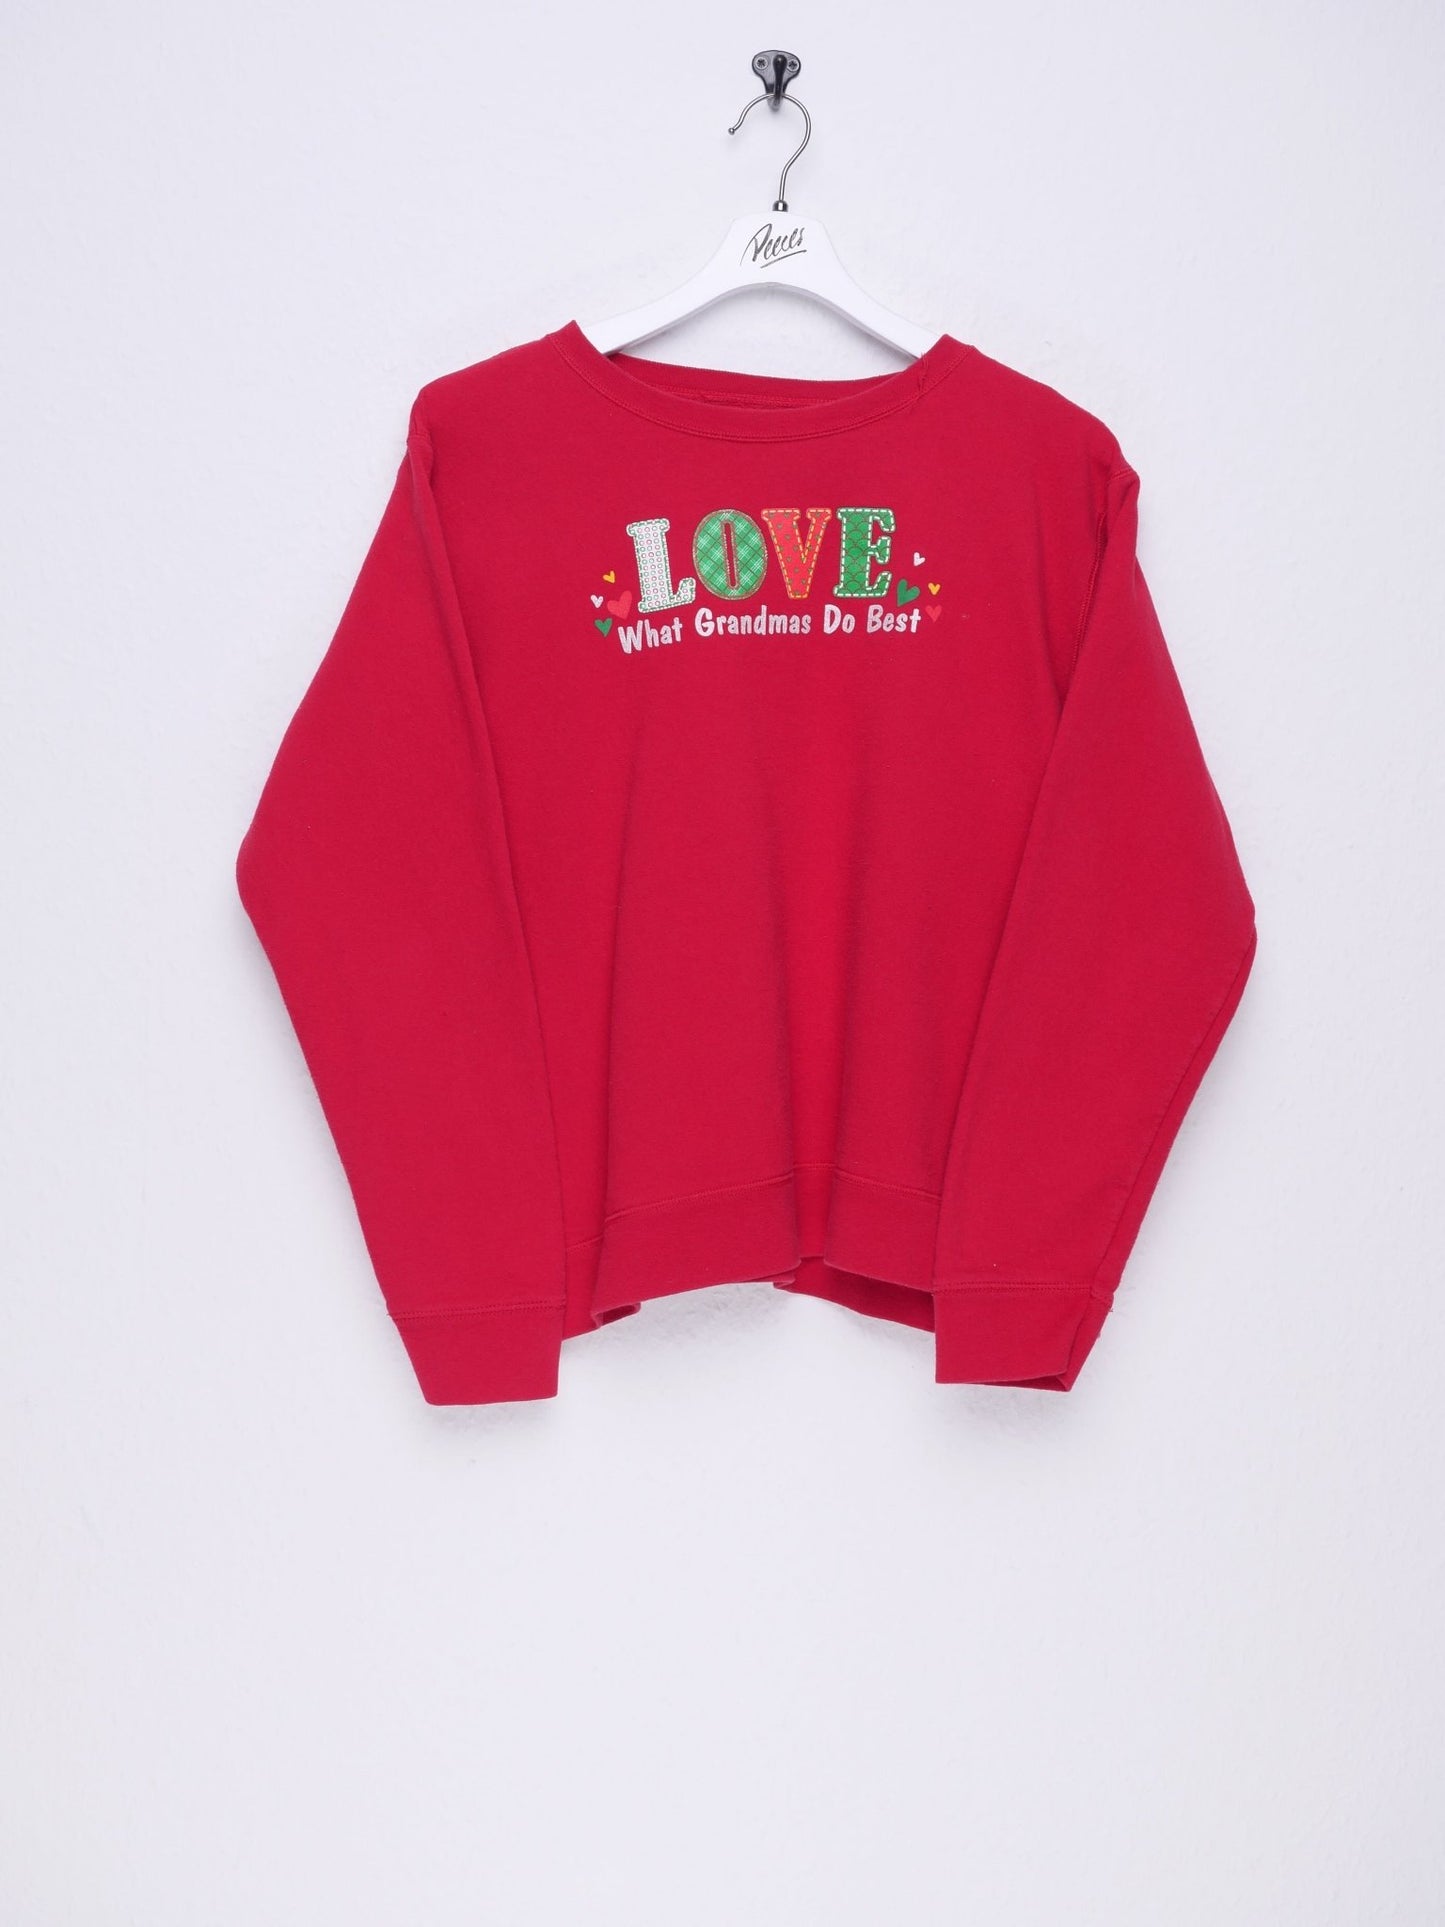 printed Spellout 'Love what grandmas do best' red Sweater - Peeces